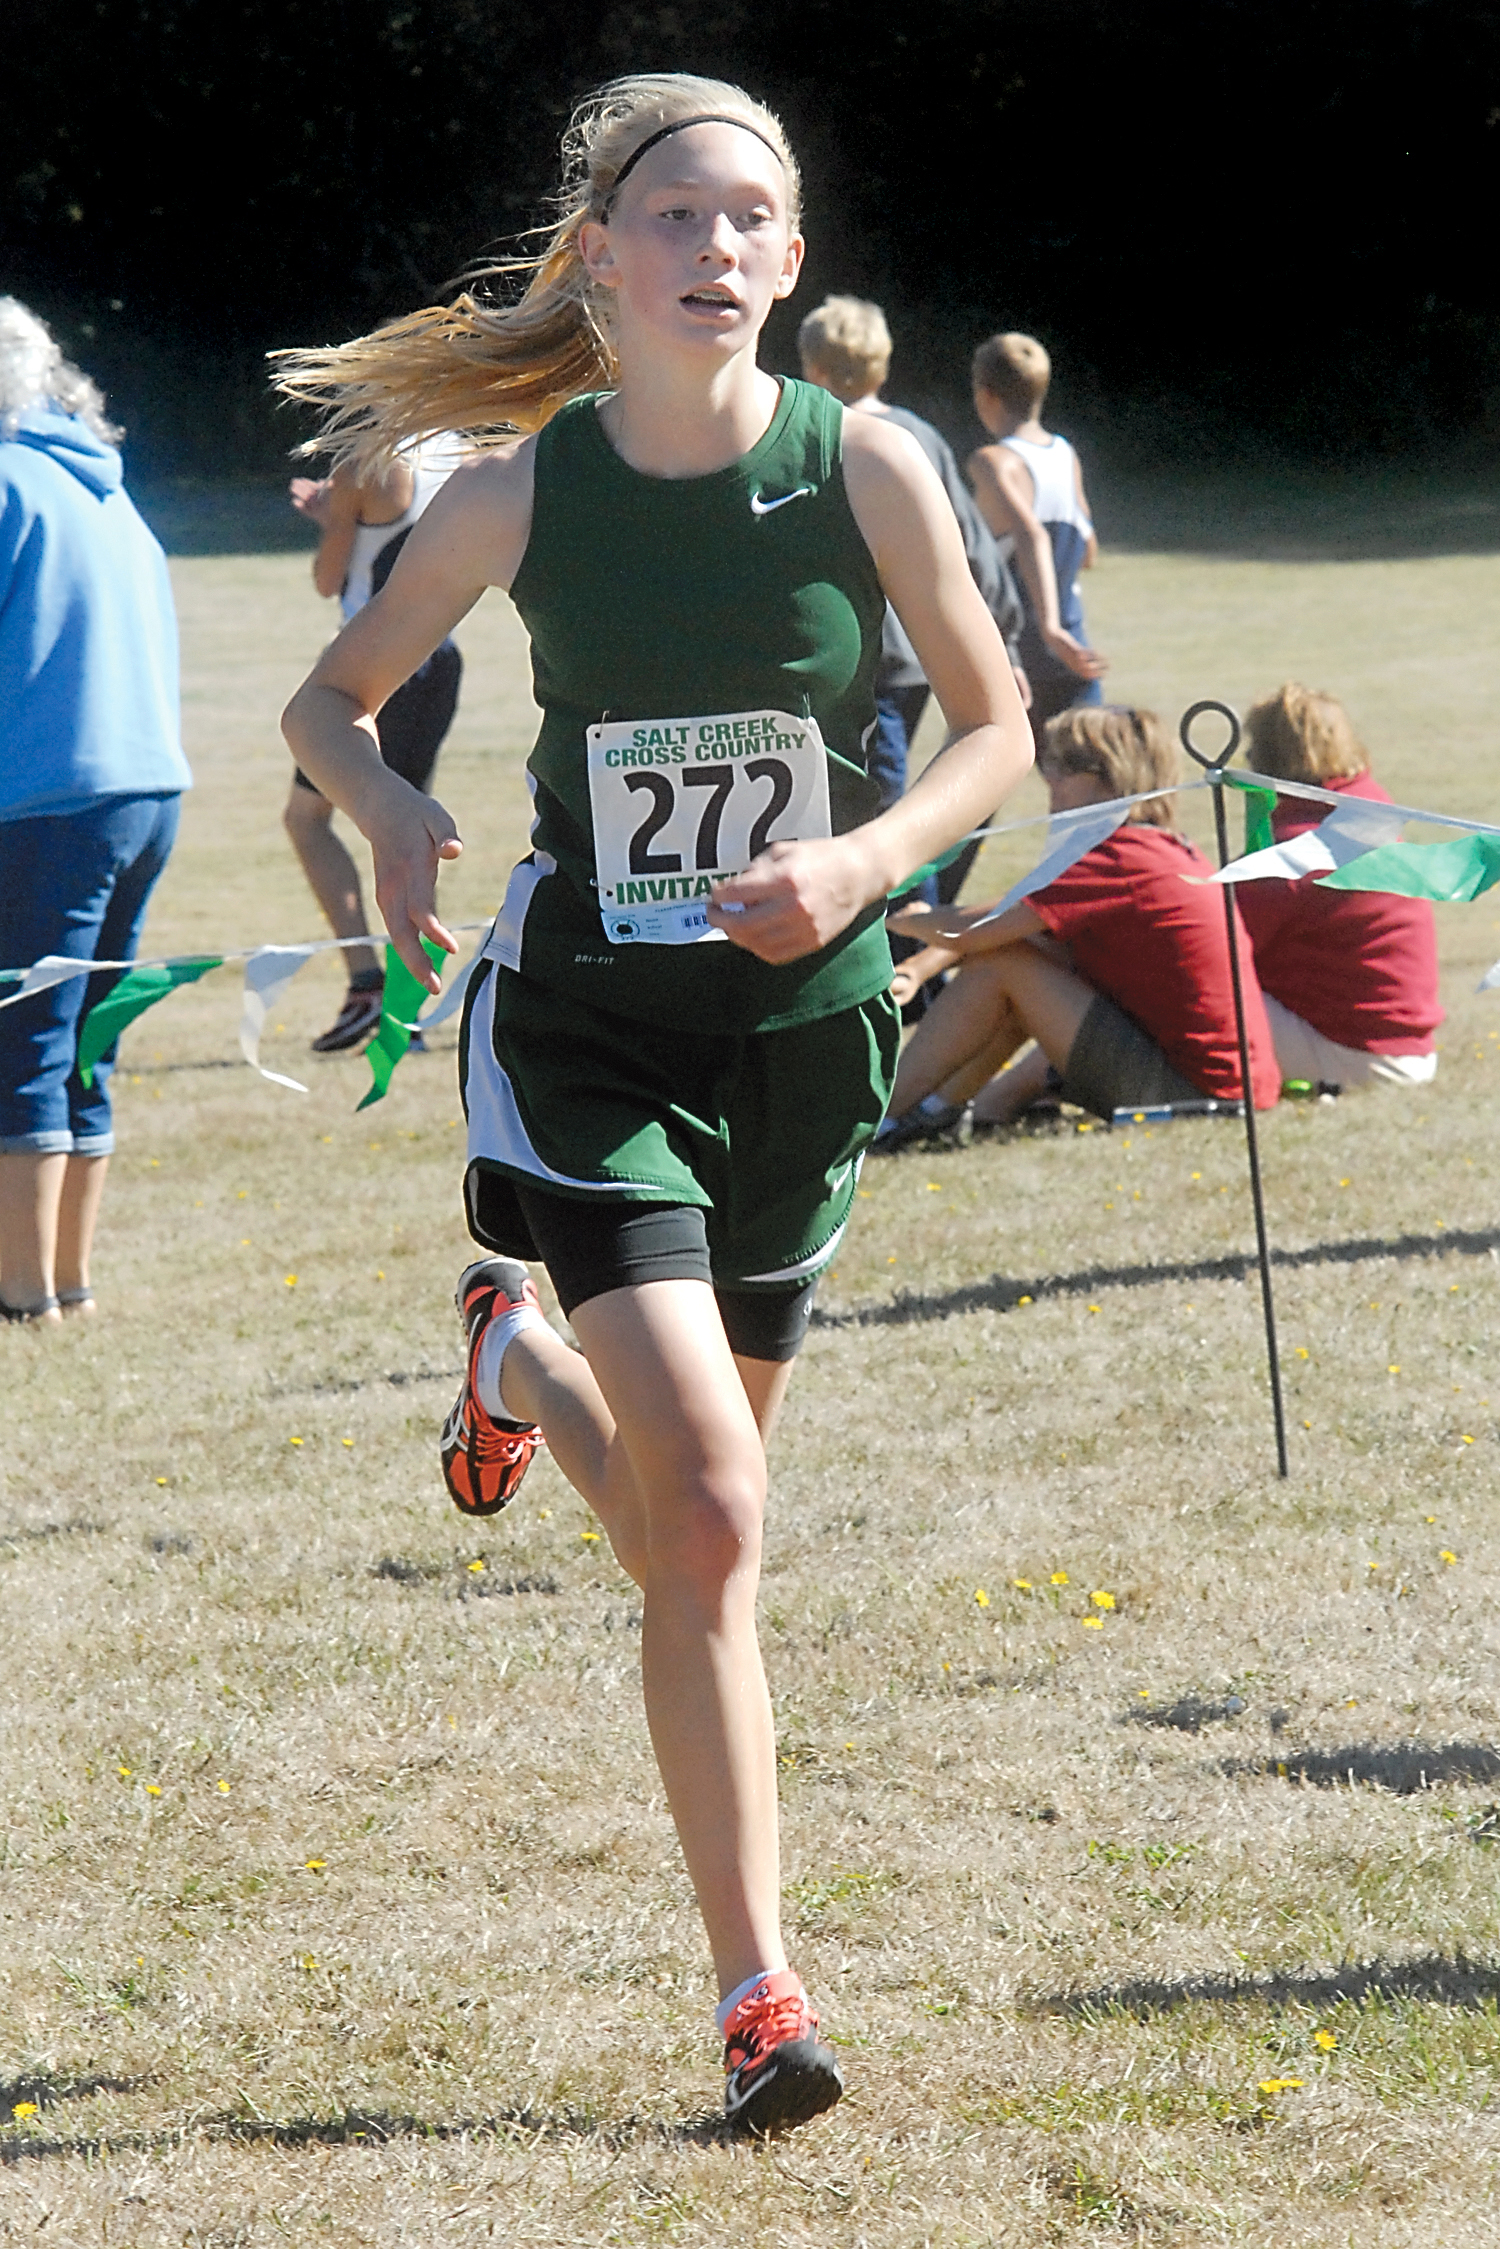 Gracie Long of Port Angeles runs to a second-place finish in the girls varsity race at the Salt Creek Invitational. Keith Thorpe/Peninsula Daily News